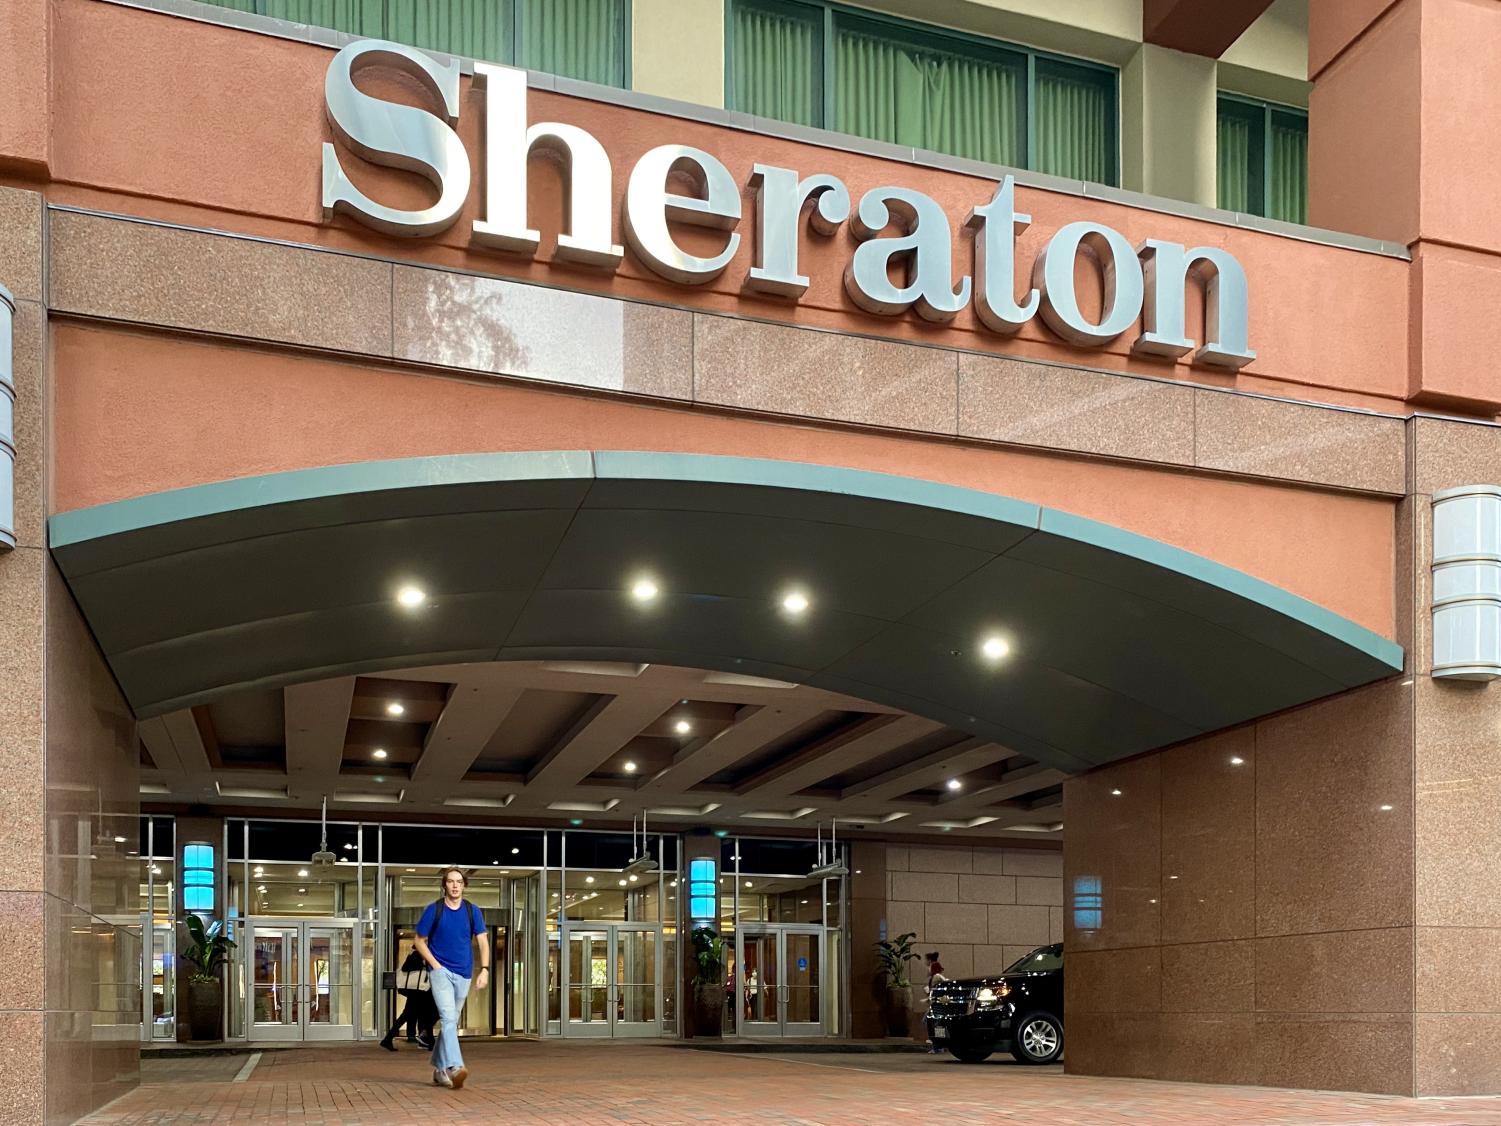 Northeastern to become permanent tenant at Sheraton Boston Hotel, converting 428 rooms into dorms